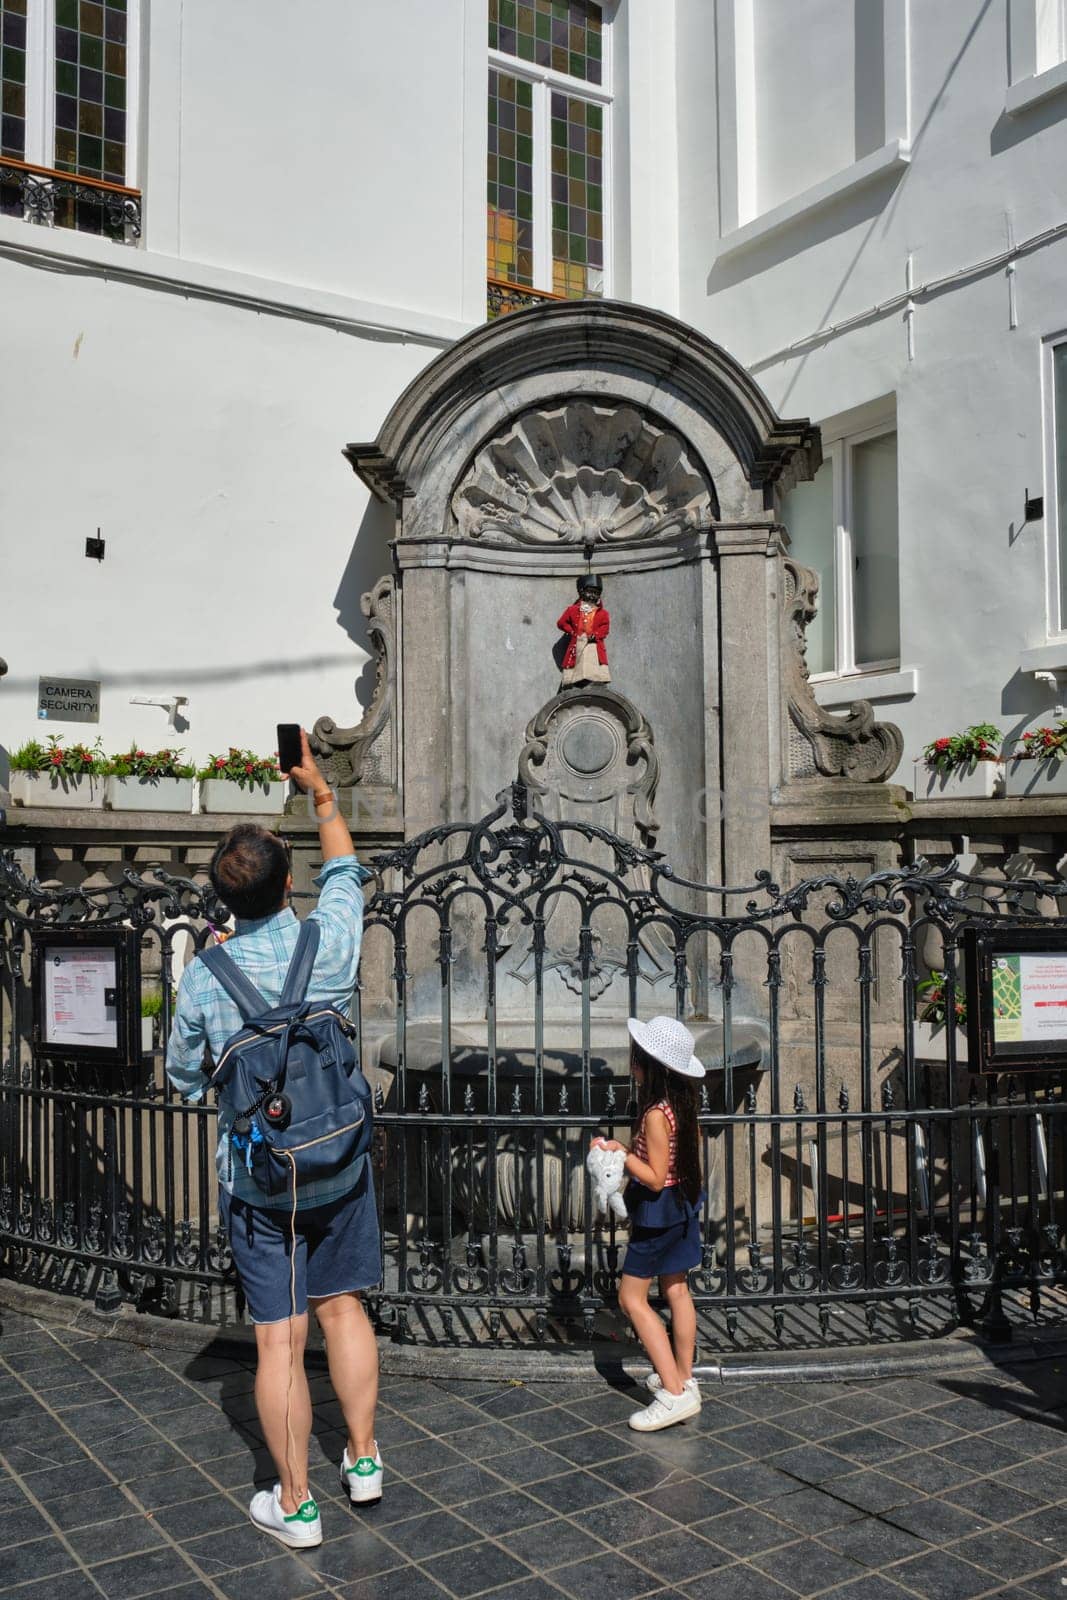 BRUSSELS, BELGIUM - MAY 31, 2018: Tourist taking pictures in front of famous tourist attraction of Brussels - dressed Manneken Pis statue fountain in Brussels. Bruxelles, Belgium